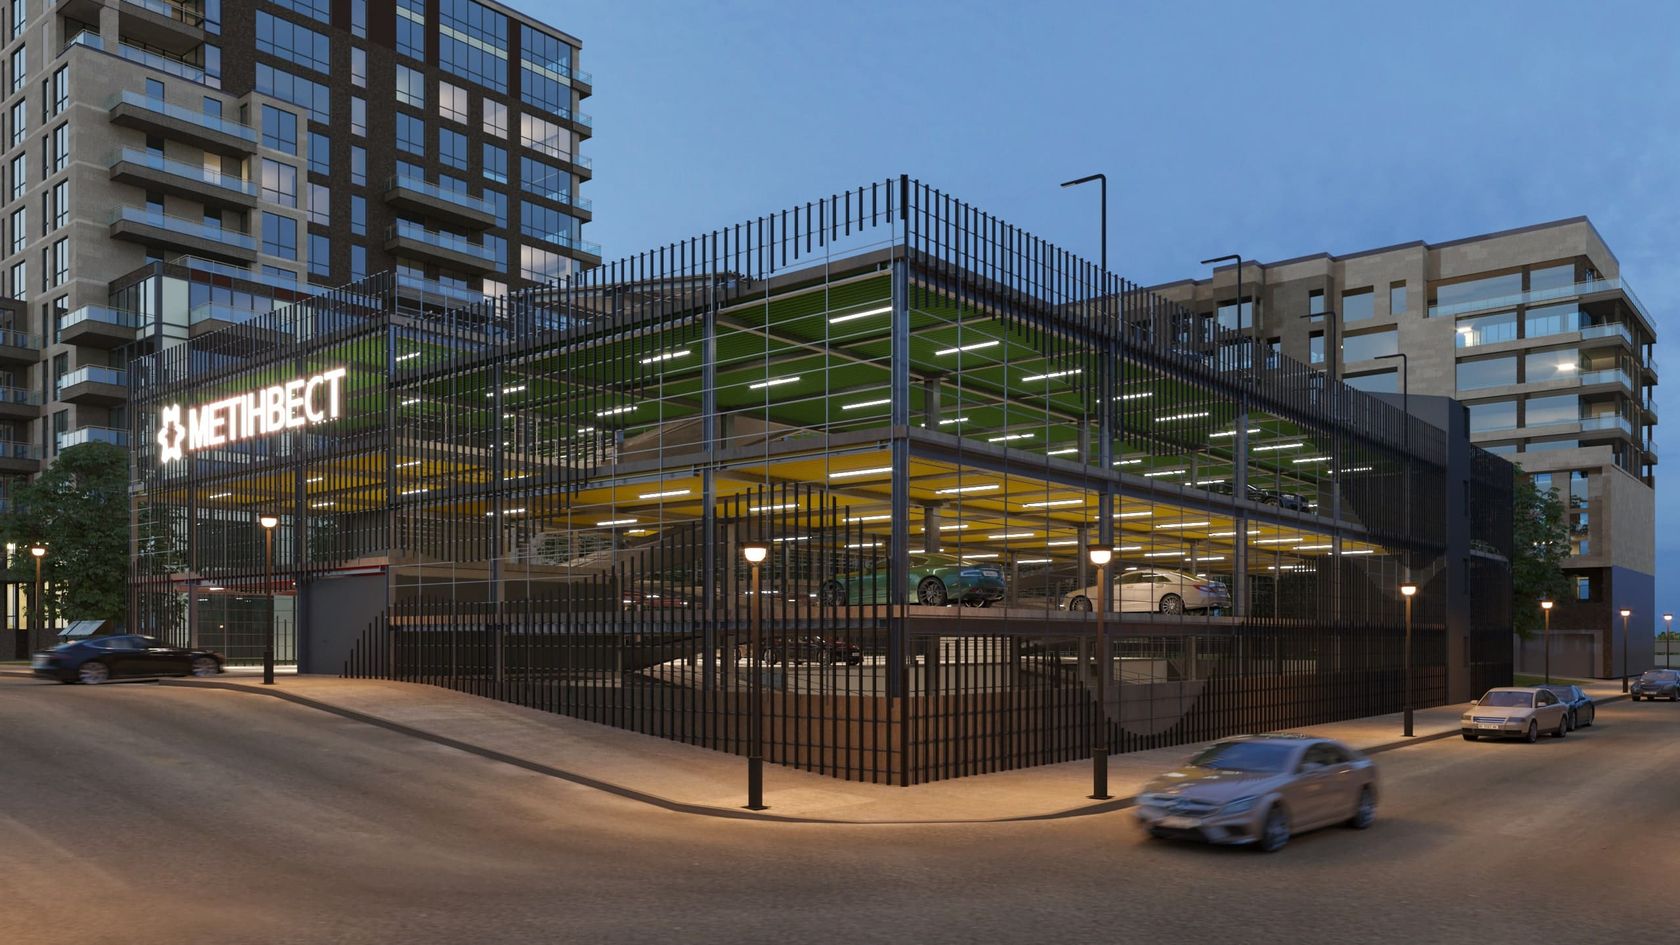 Steel car parks: how to deal with urban car congestion